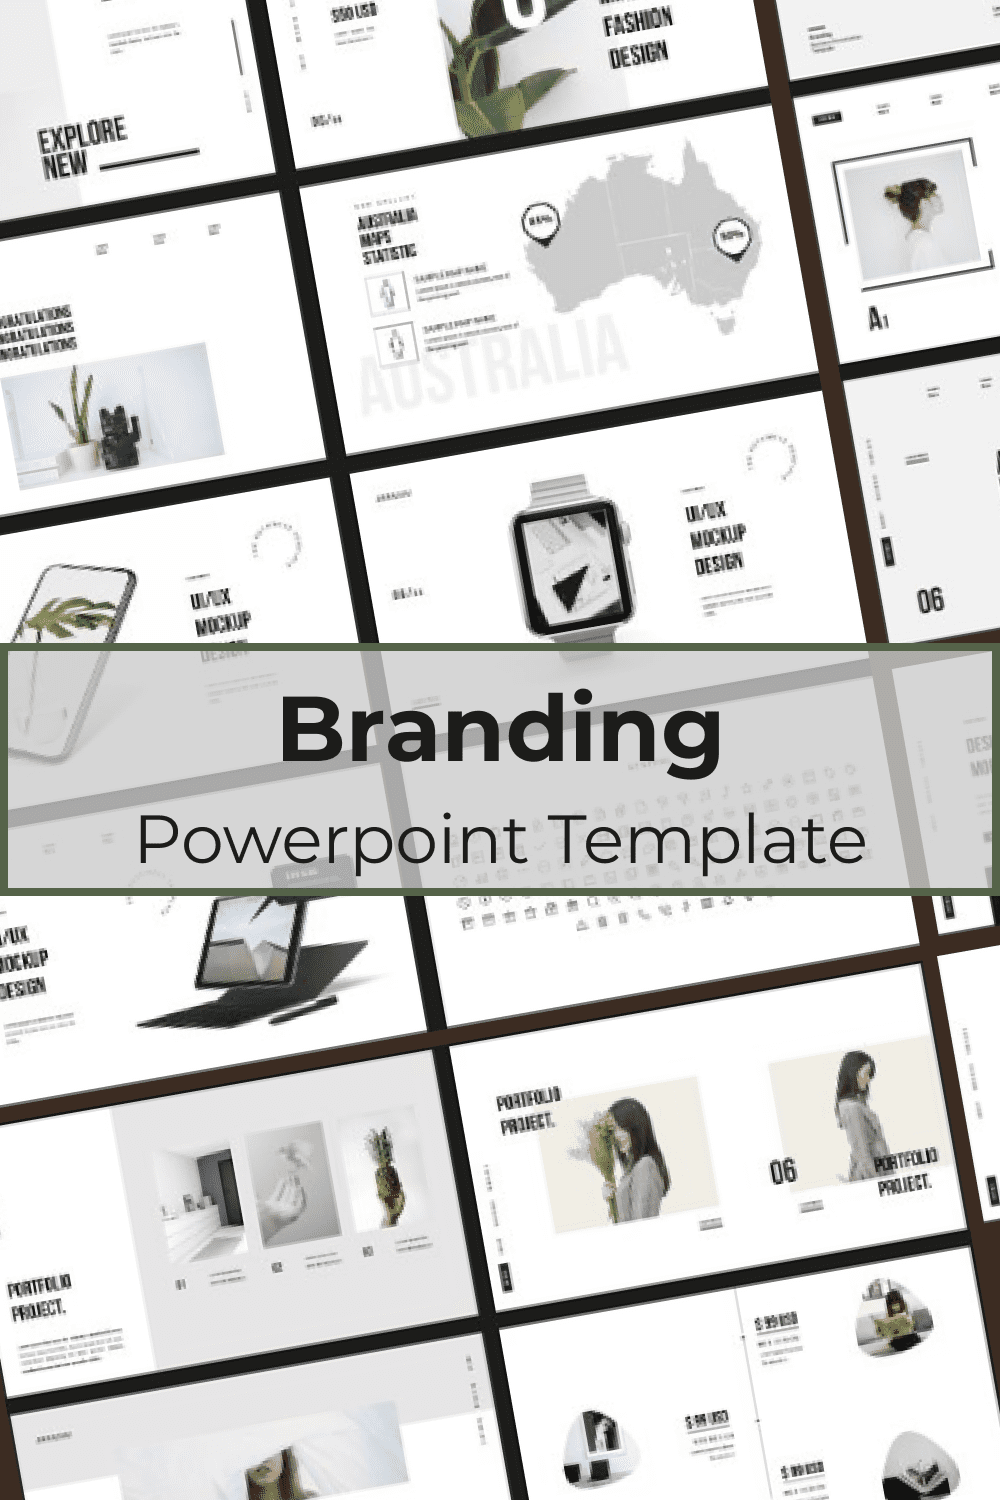 Light template suitable for any theme and business.